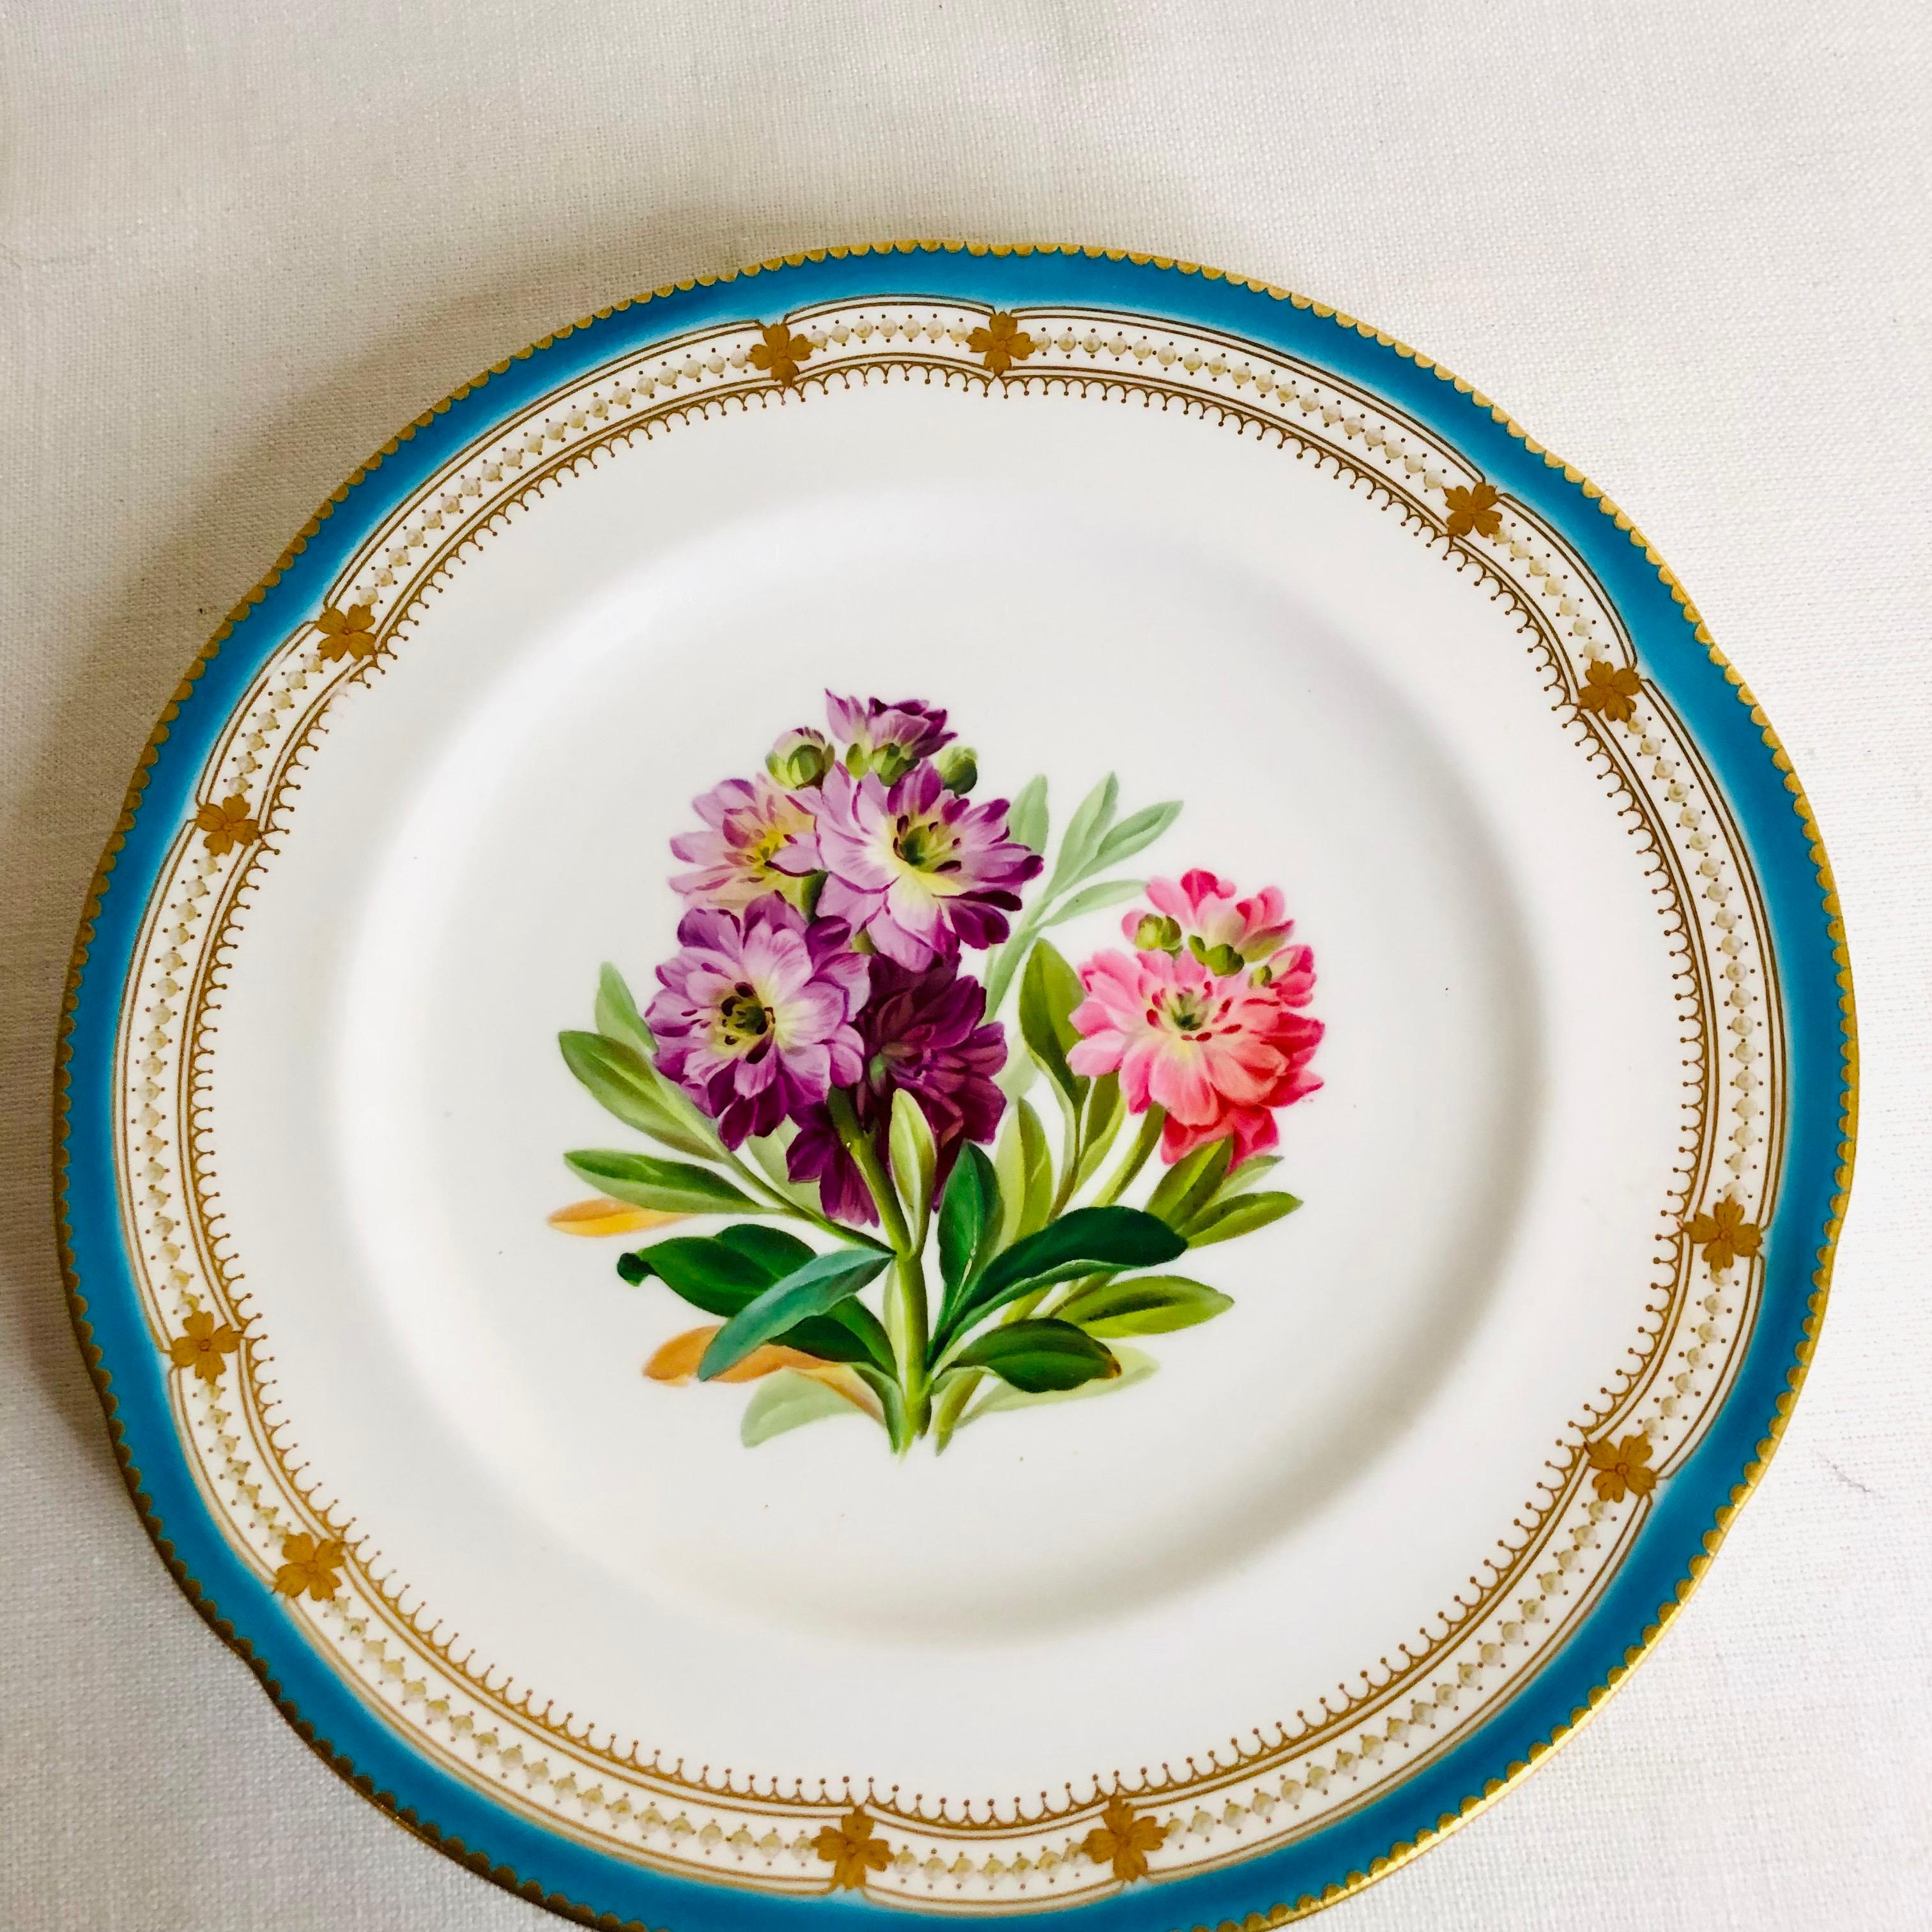 Set of 16 Rare Minton Plates Each Hand-Painted with a Different Flower Bouquet 11